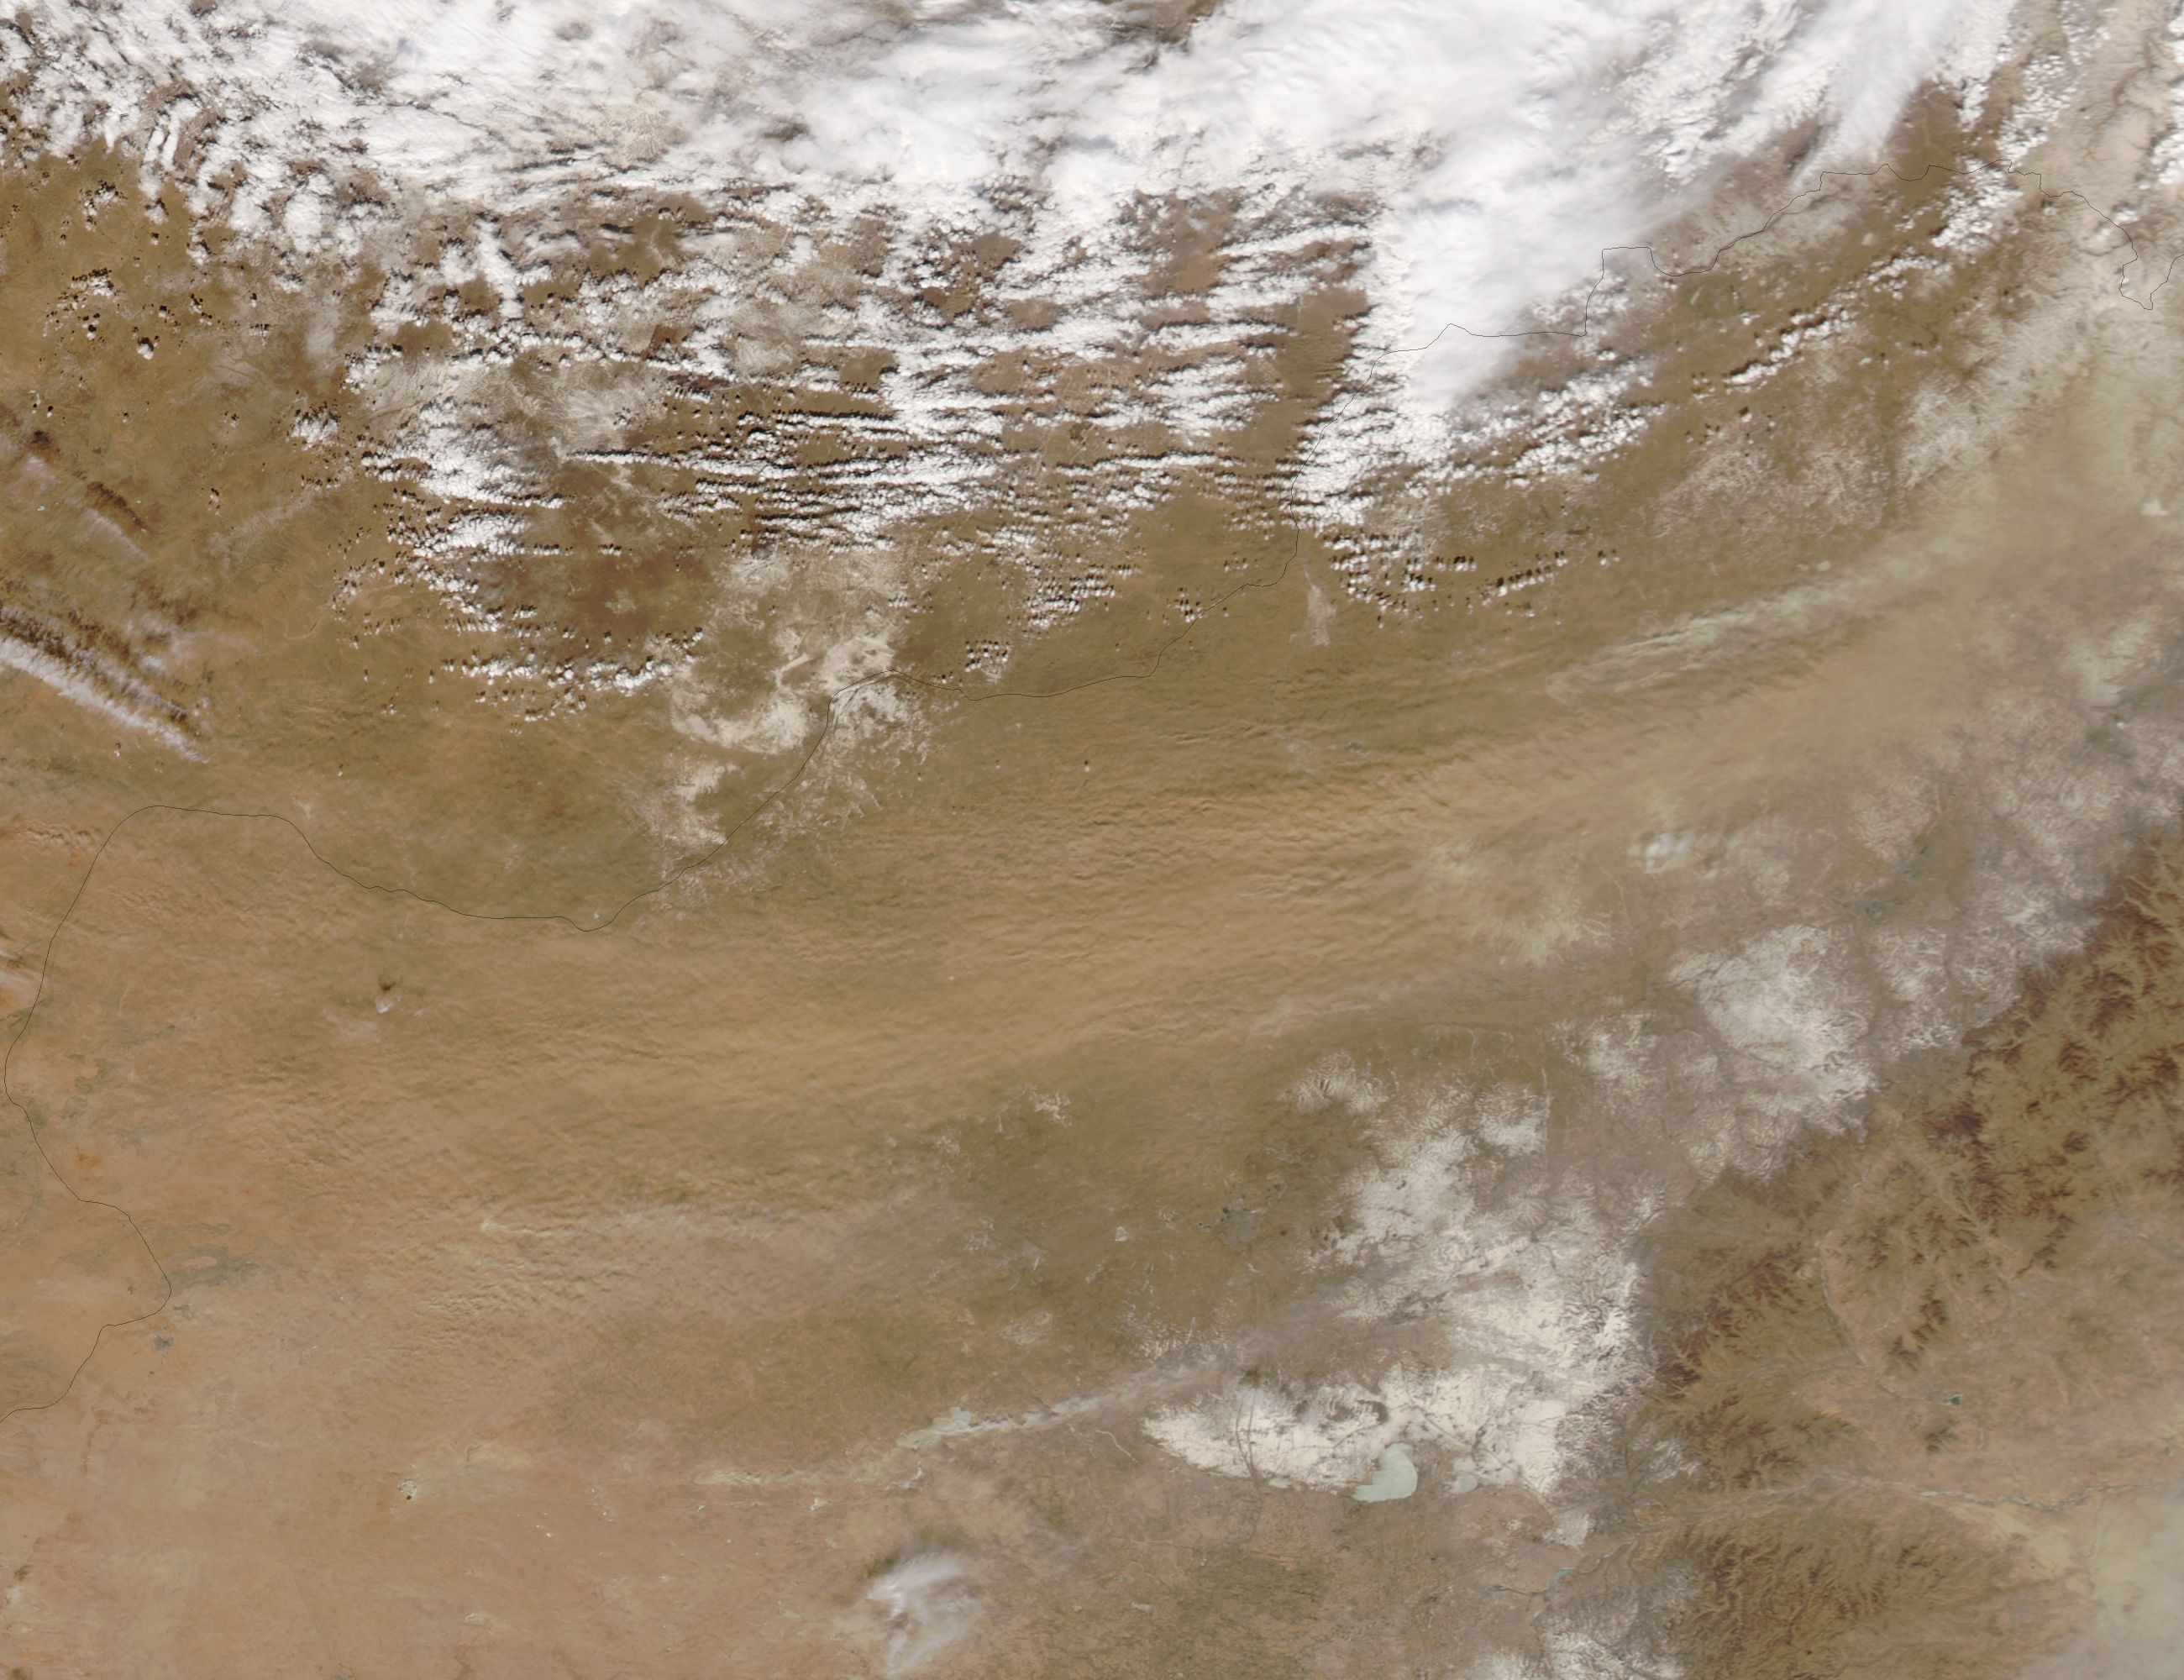 Dust storm in the Gobi Desert - related image preview